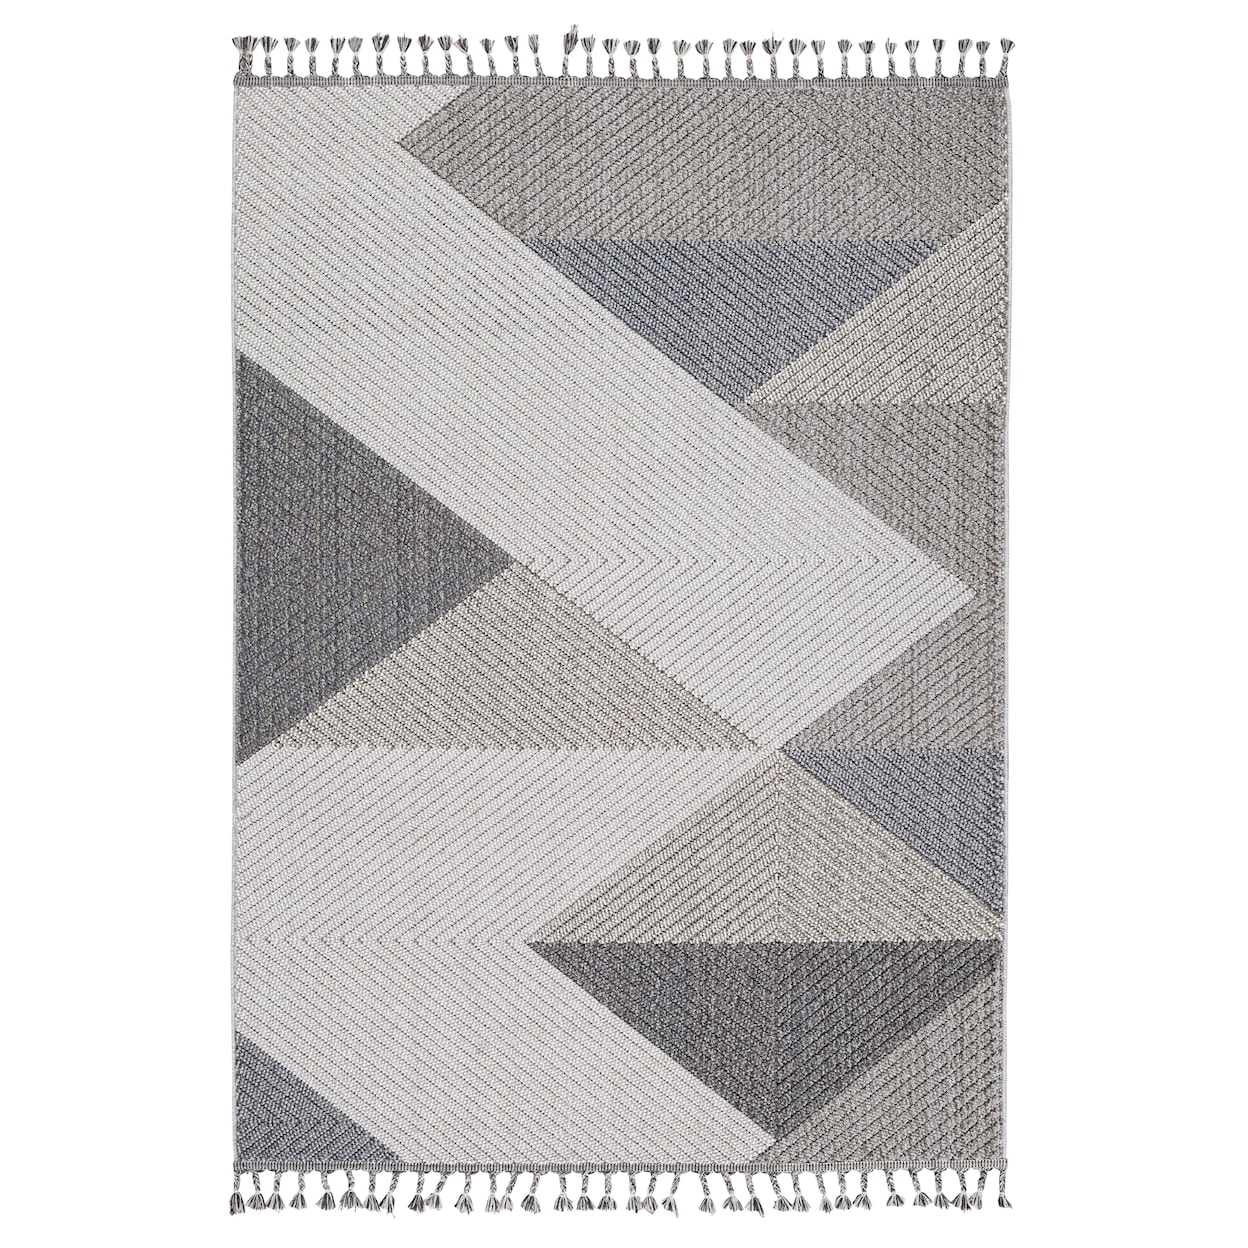 Benchcraft Contemporary Area Rugs Toksook Large Rug